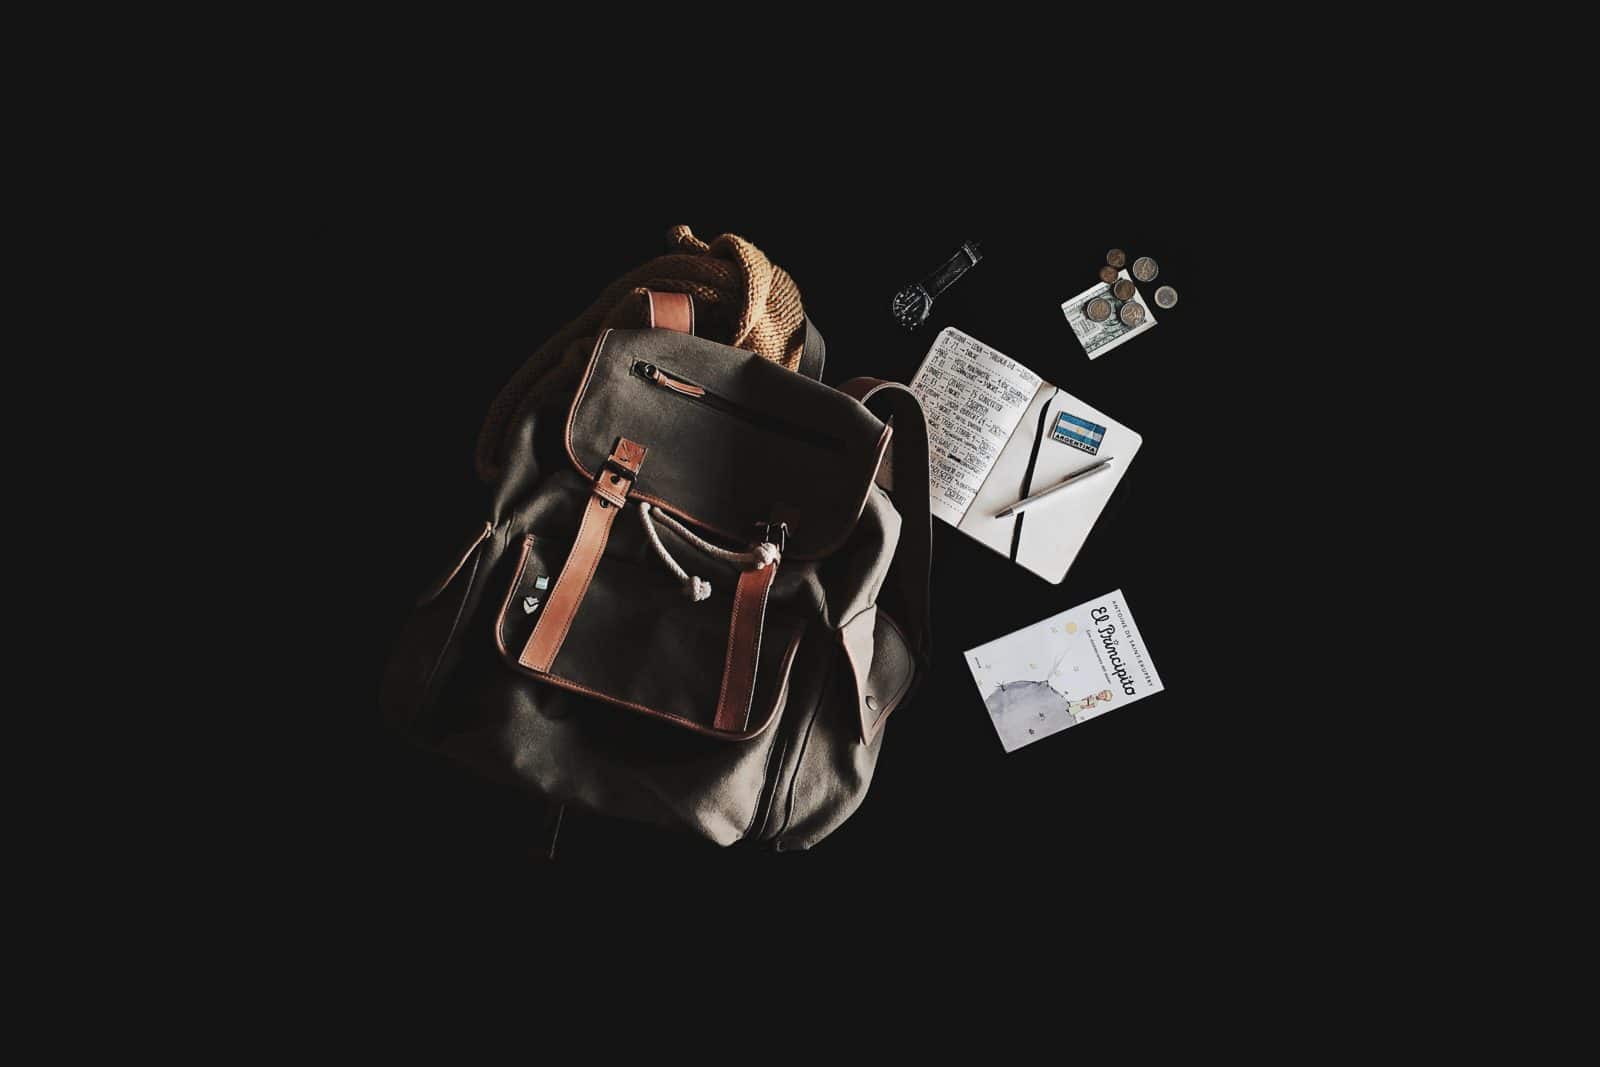 Photo by Cynthia del Río on Unsplash. Backpack, travel, journey, pack